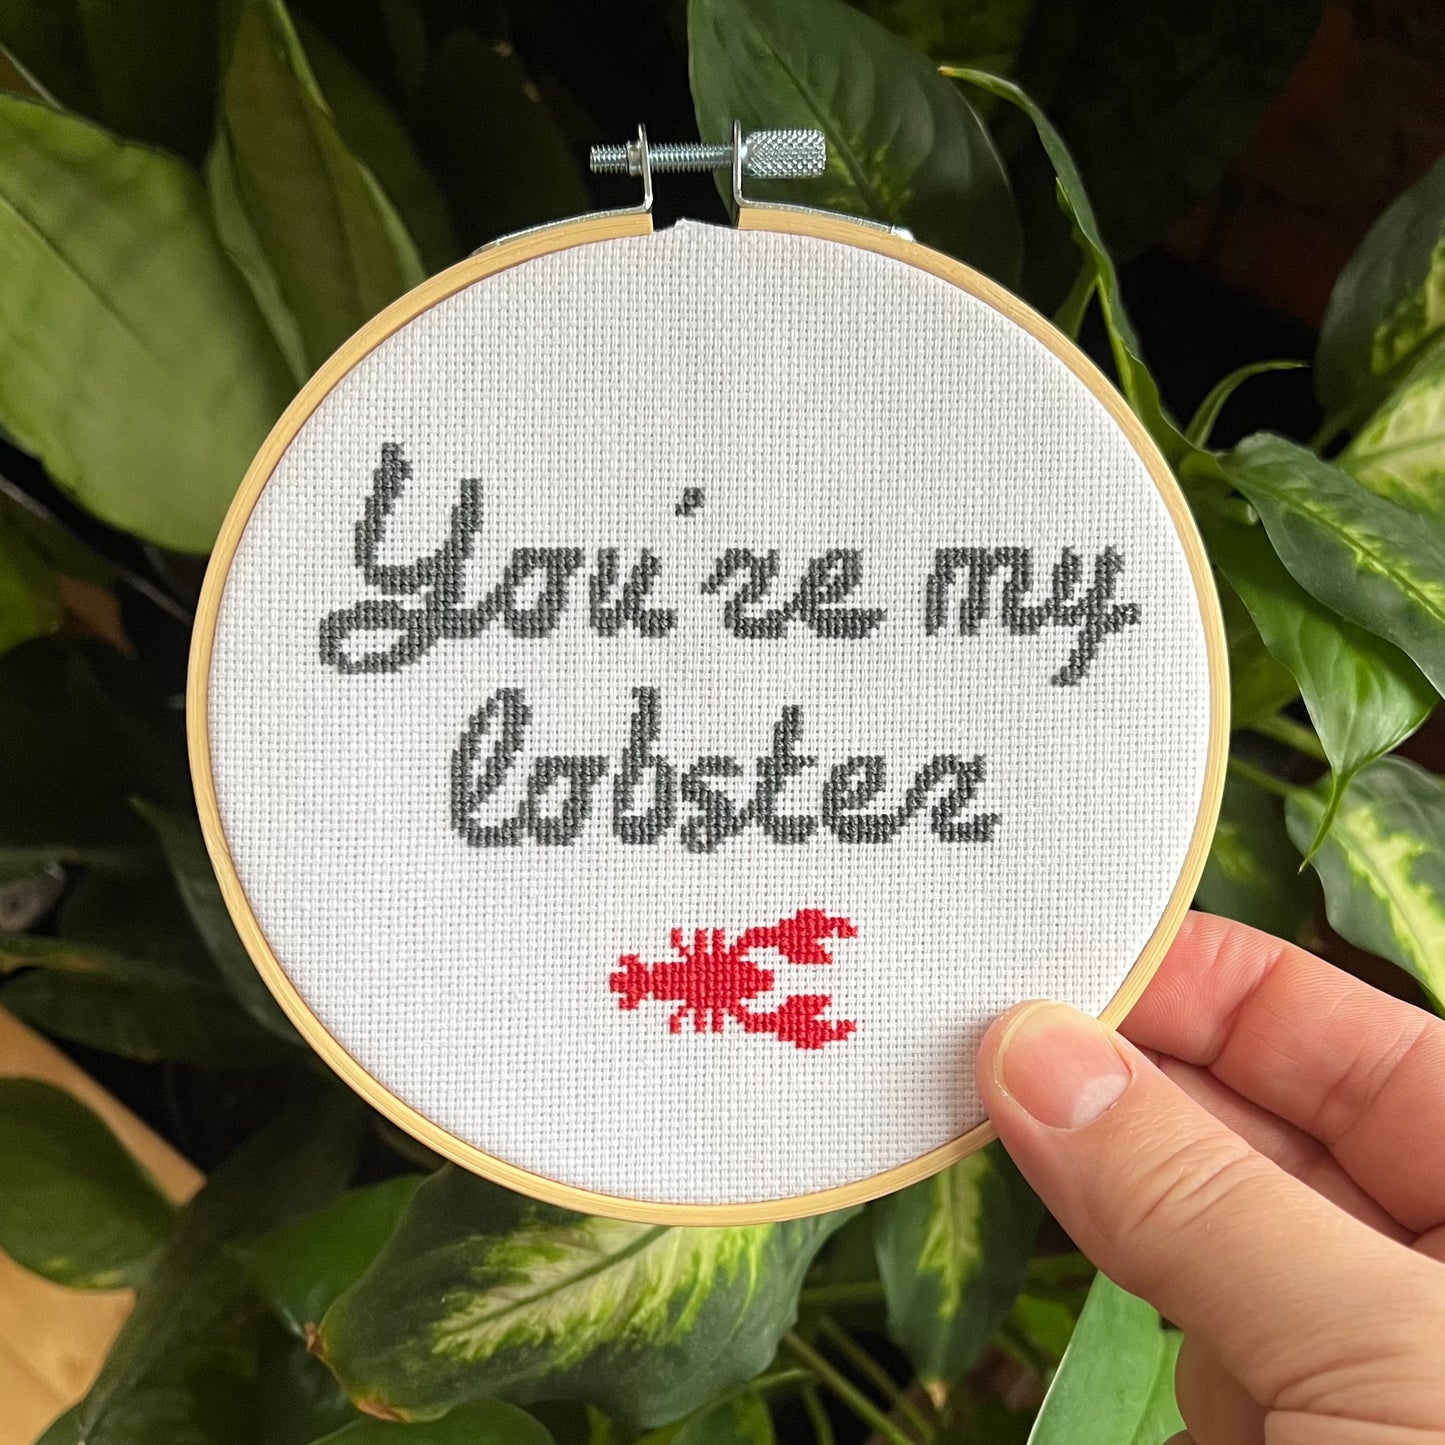 You’re My Lobster 5” Hand Stitched Cross Stitch Hoop